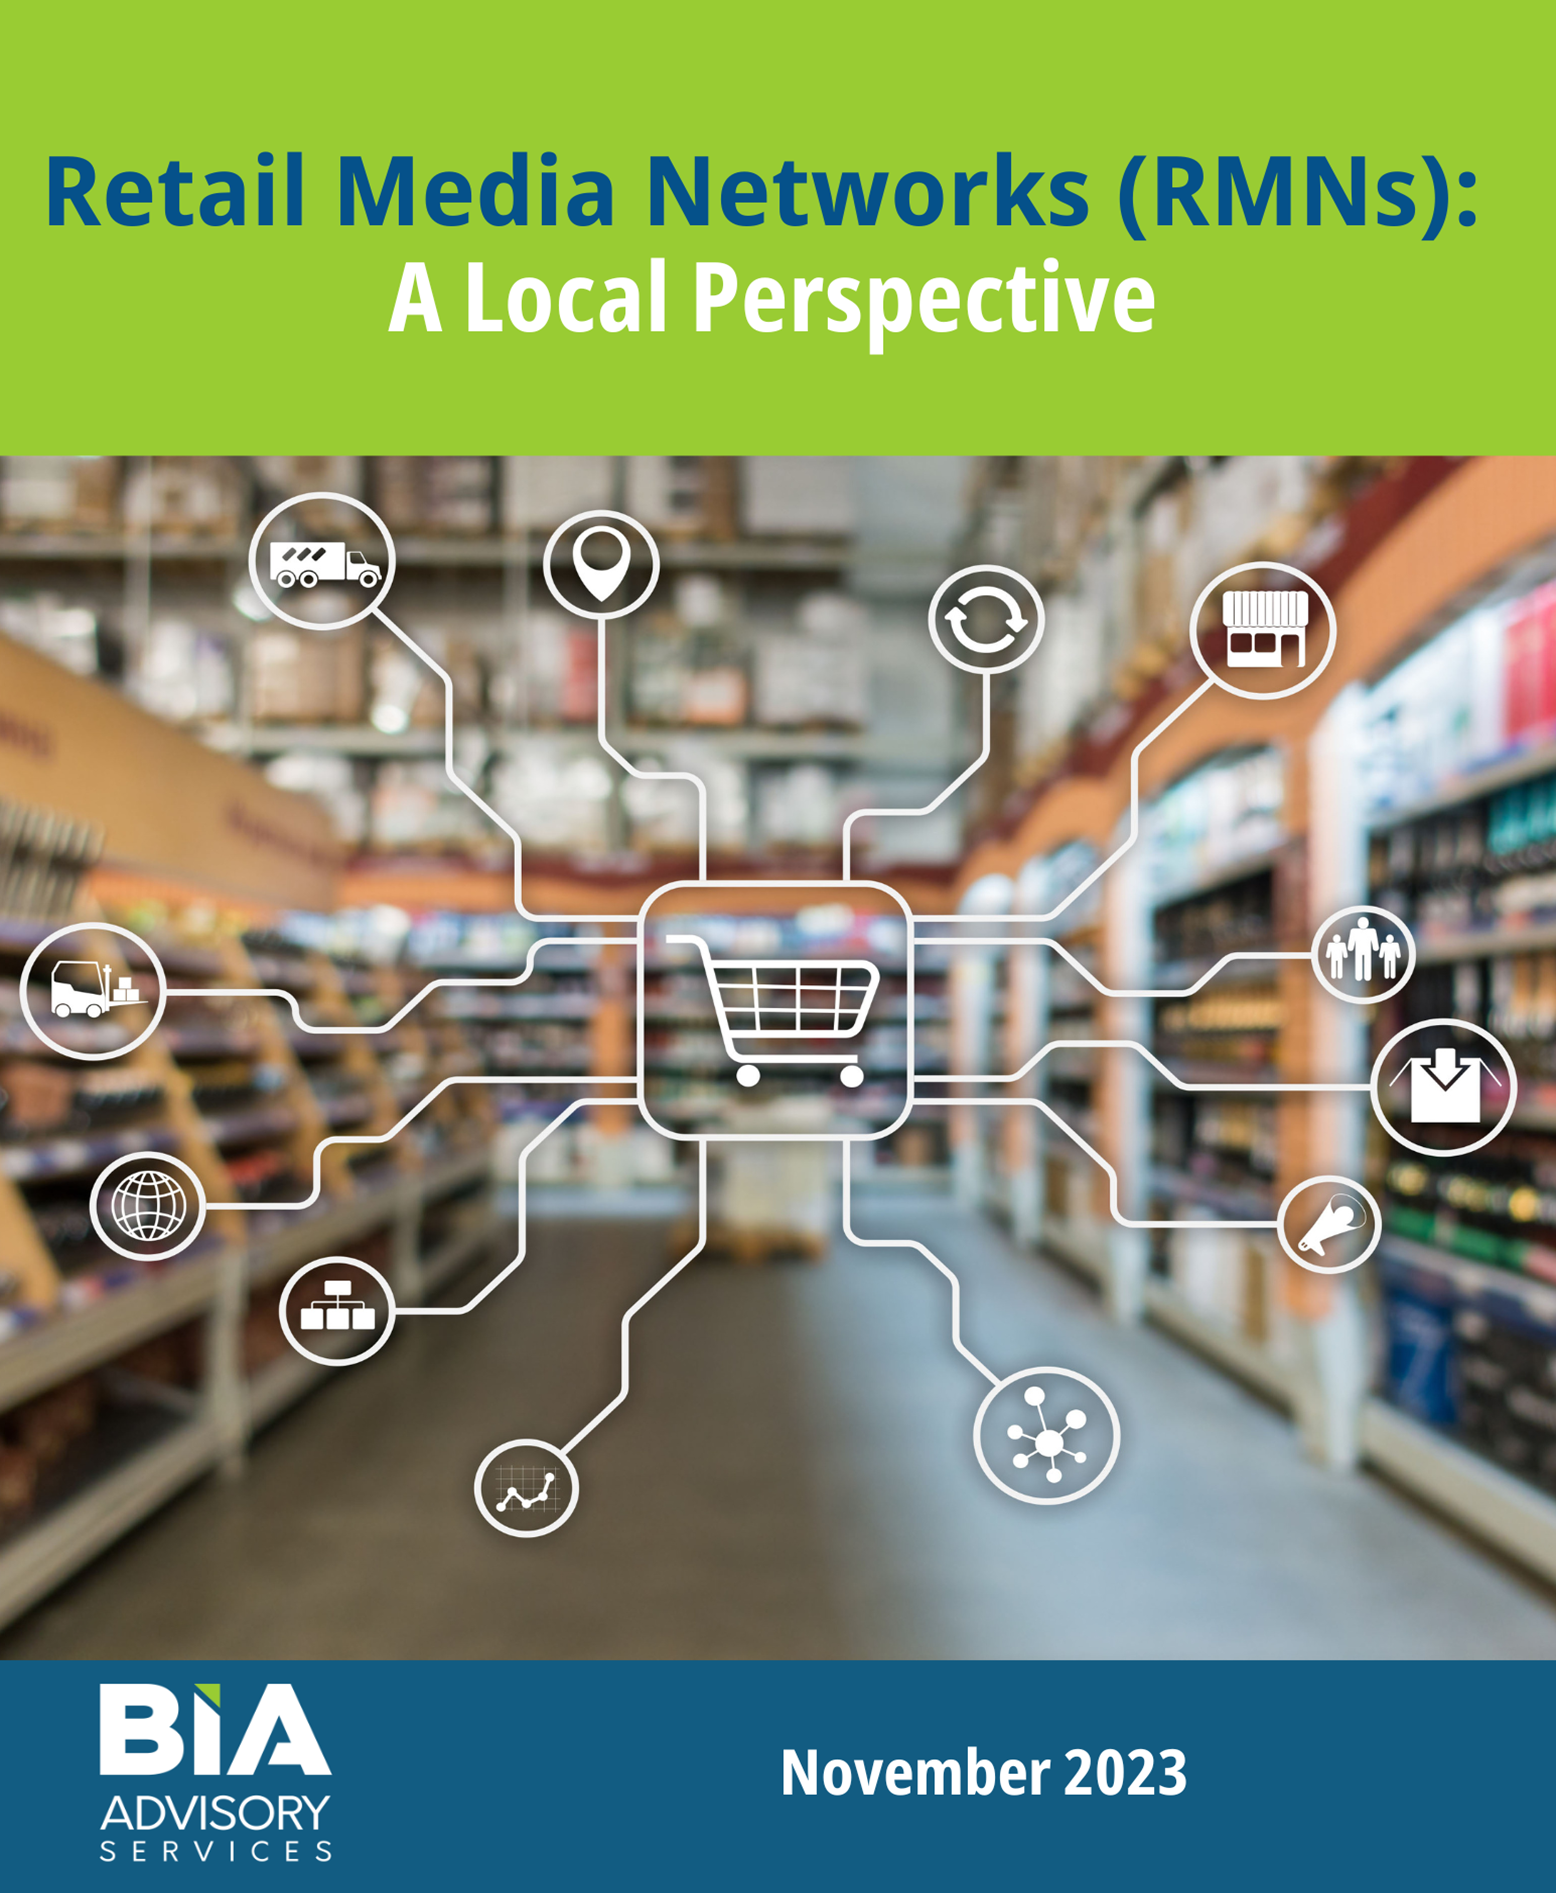 BIA Delivers a Local Perspective on Retail Media Networks: Paper & Podcast